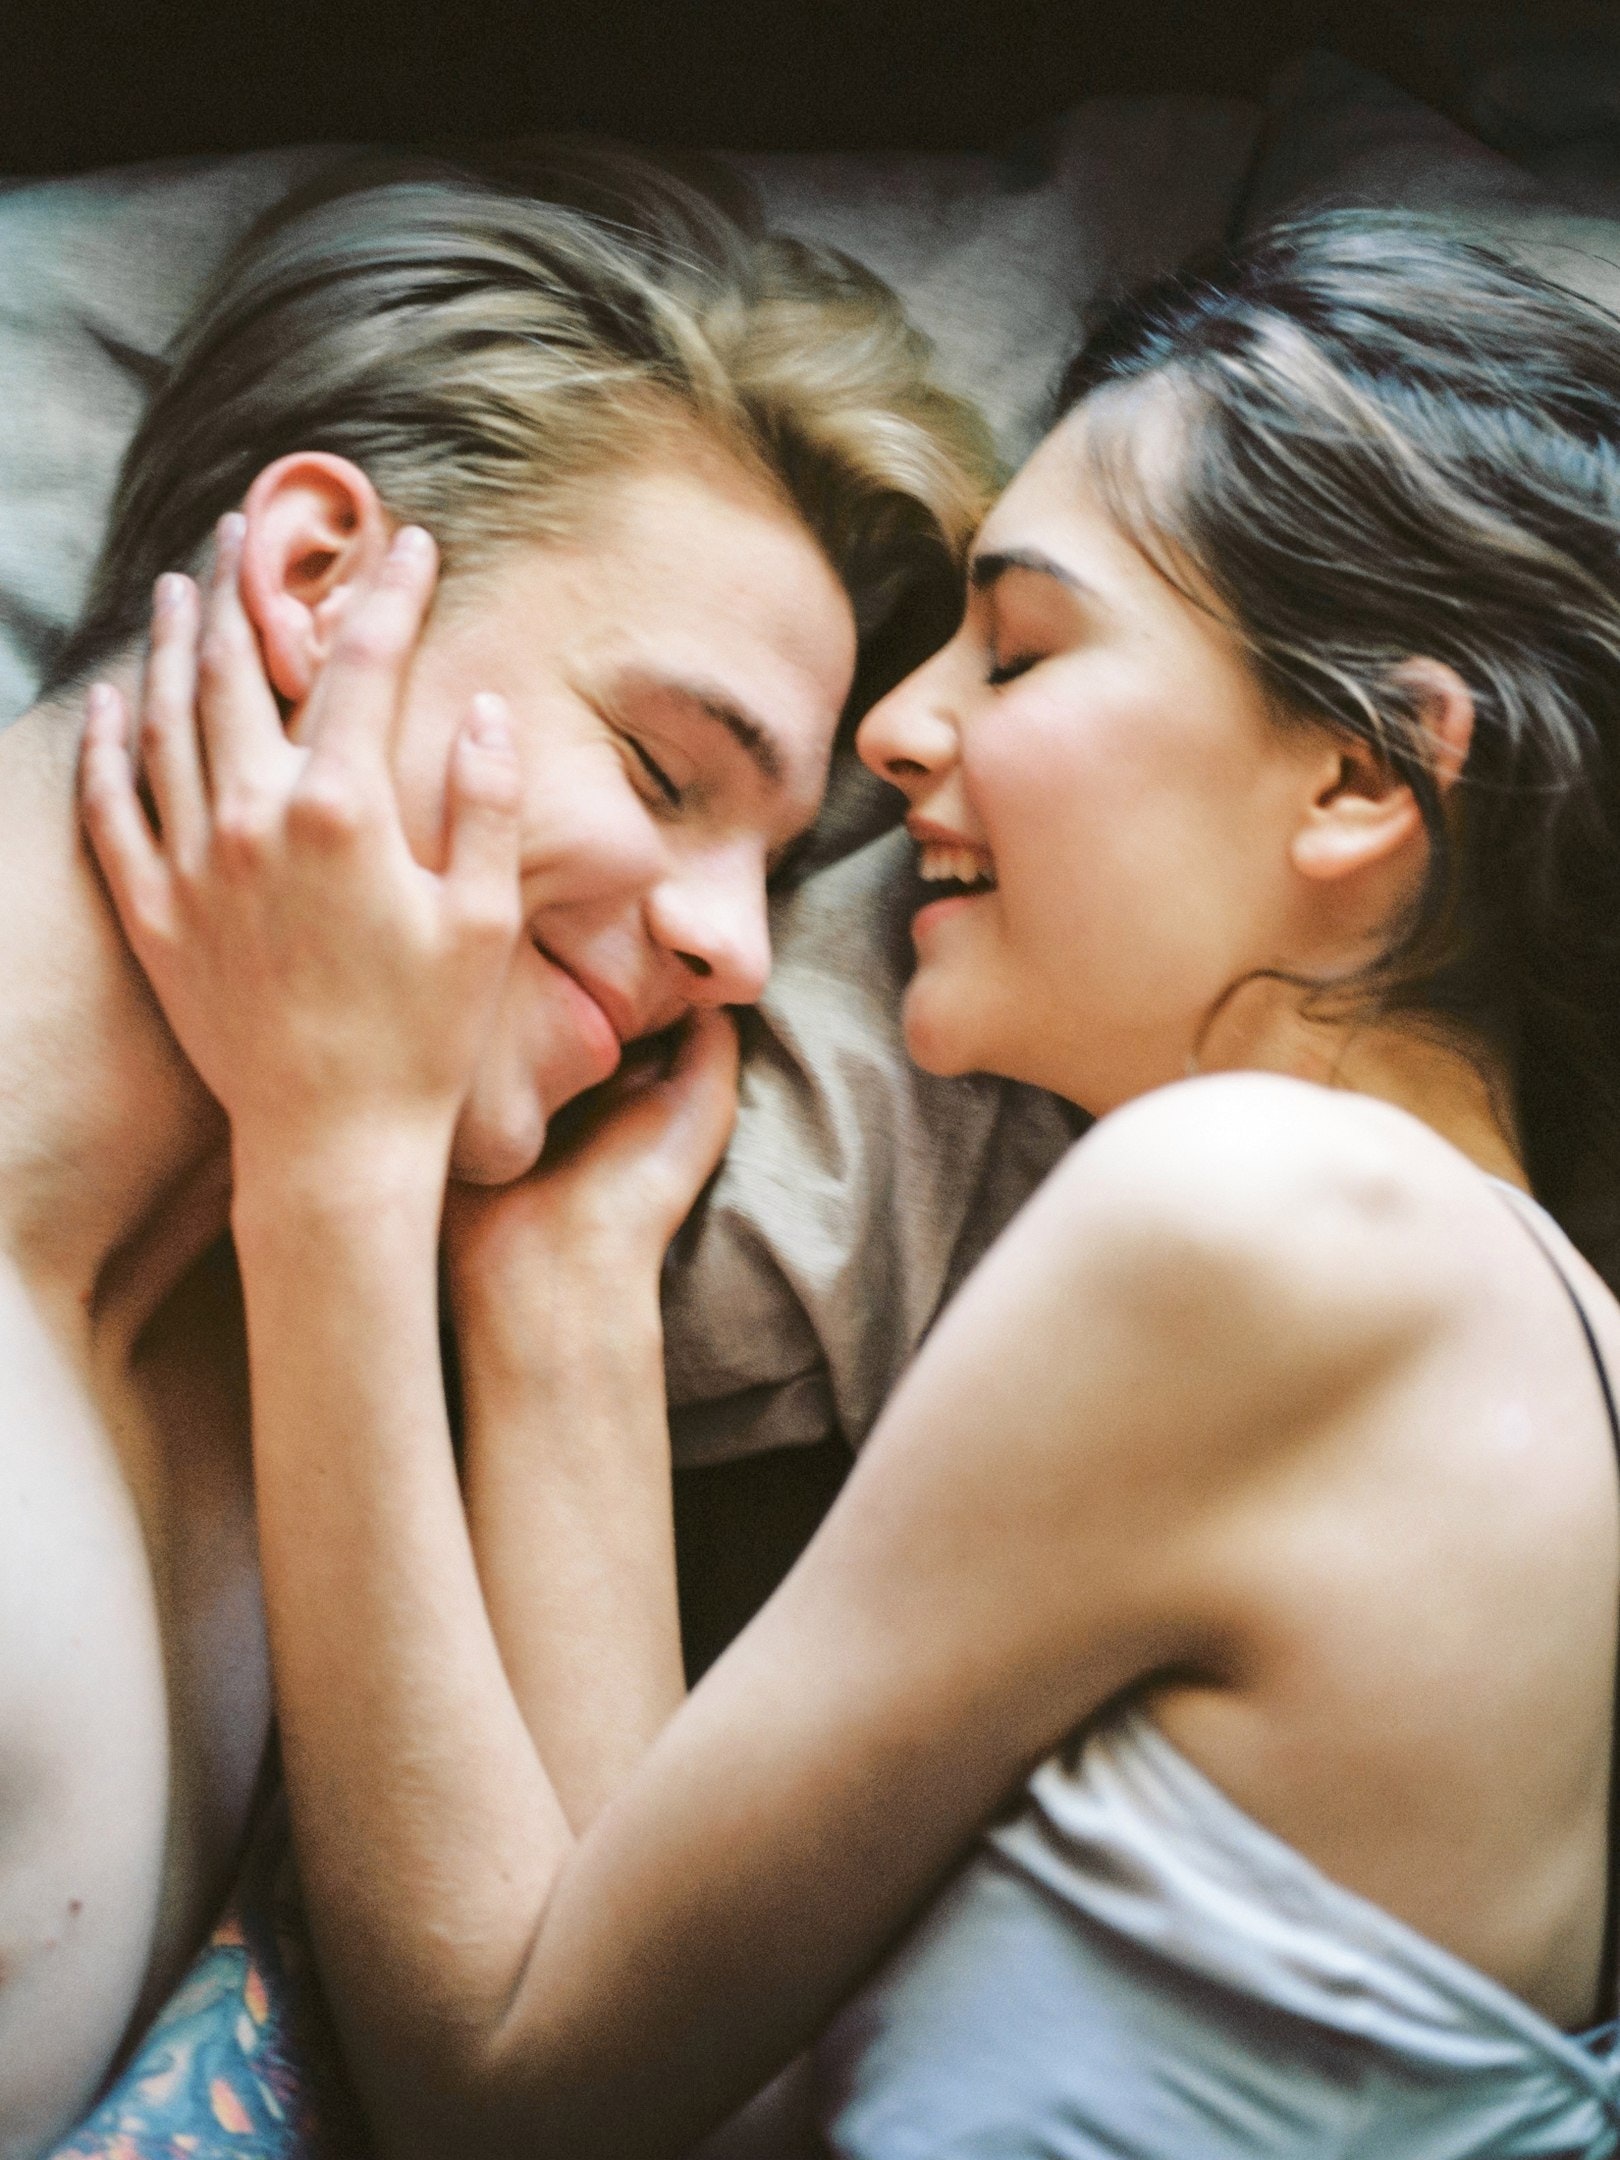 A couple laughing in bed. | Source: Pexels